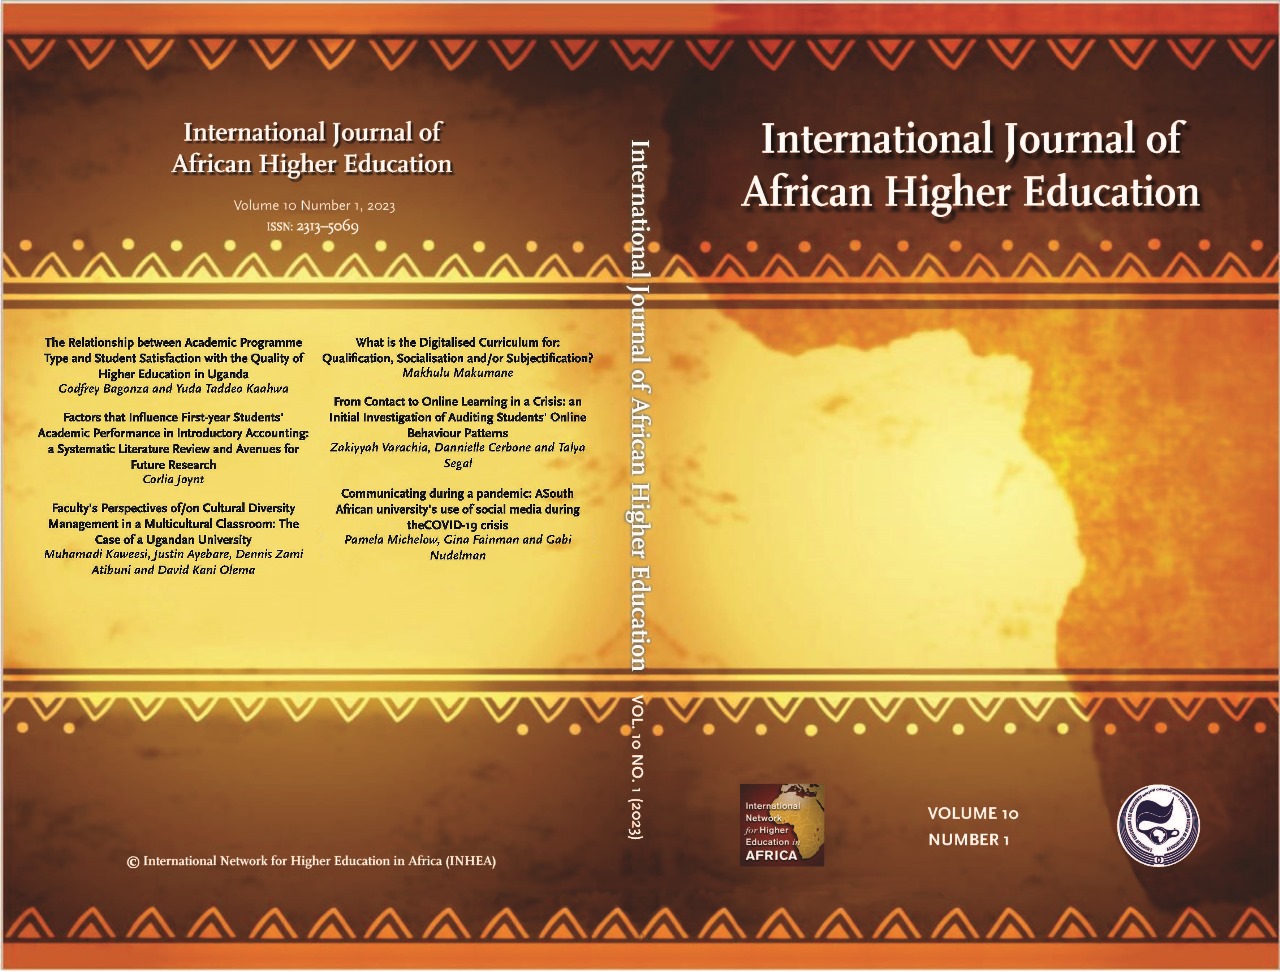 					View Vol. 10 No. 1 (2023): International Journal of African Higher Education, Volume 10, Number 1, 2023 - Regular Issue
				